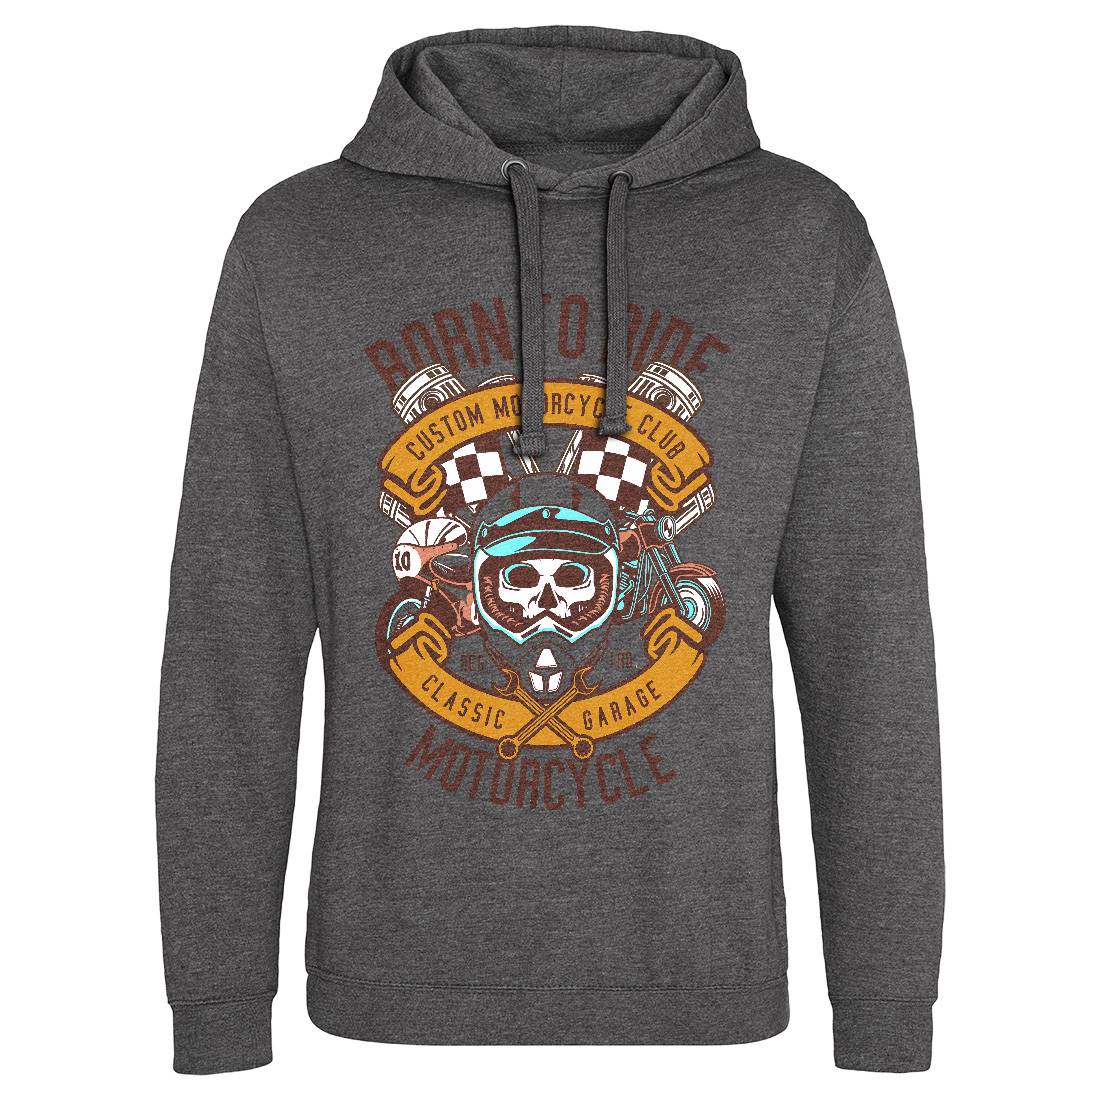 Born To Ride Mens Hoodie Without Pocket Motorcycles D509